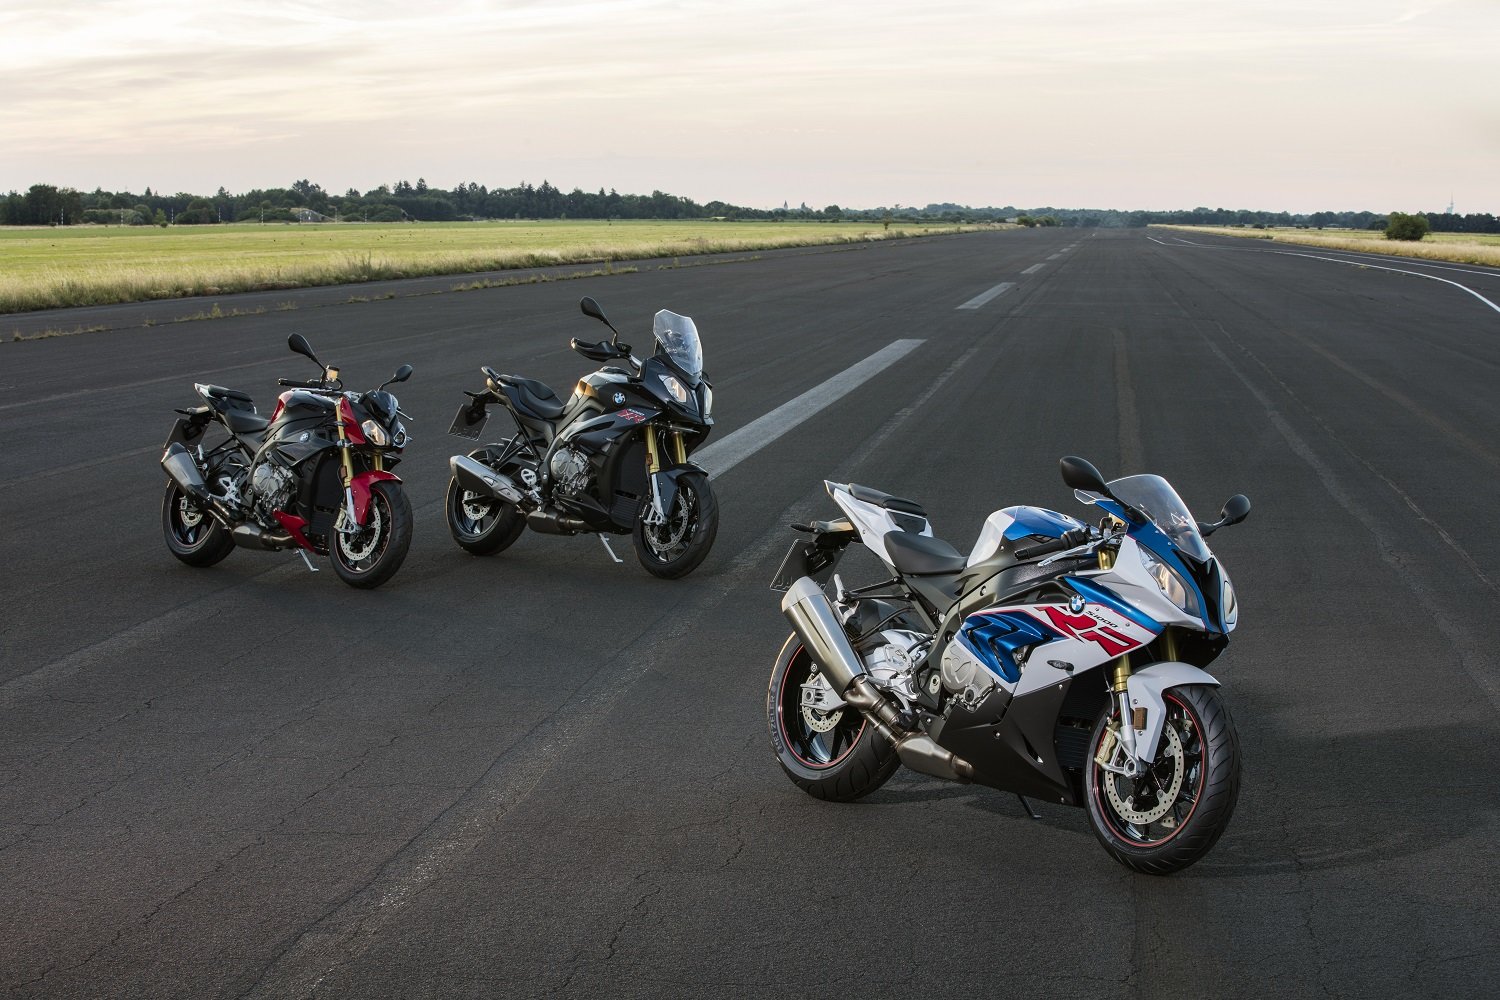 BMW S 1000 RR, S 1000 R a S 1000 XR